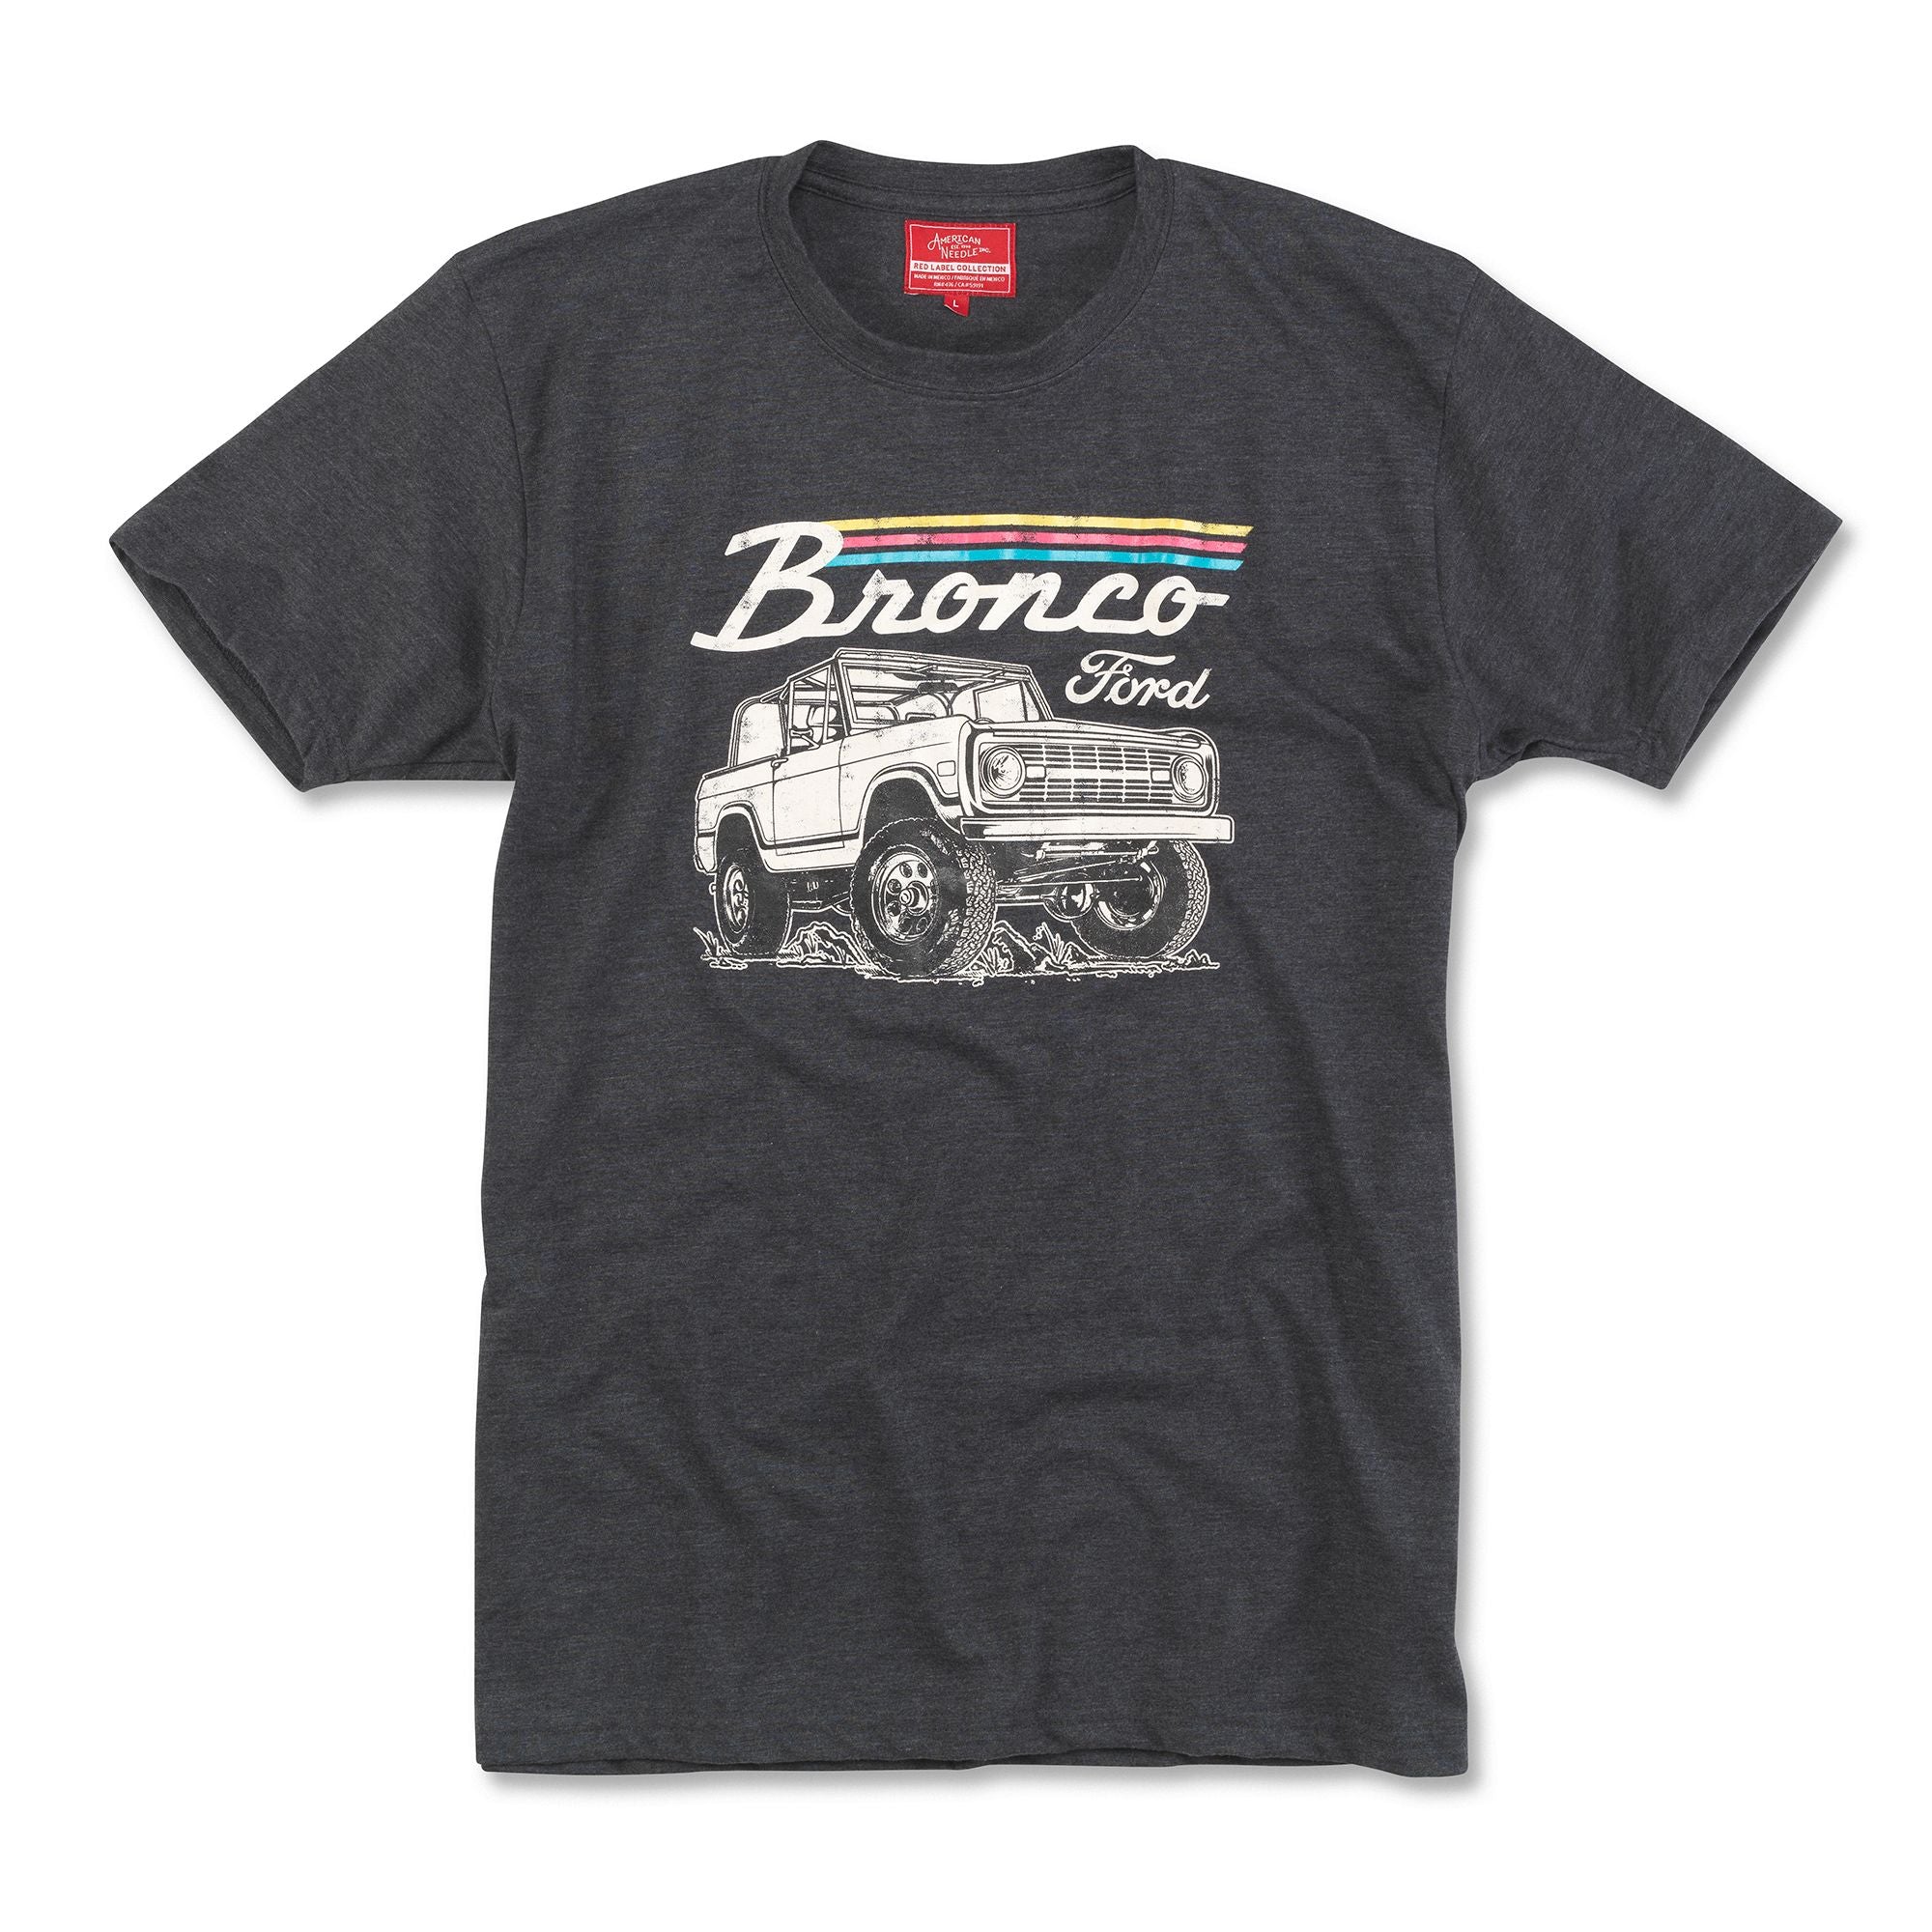 Red Label Tee - Bronco